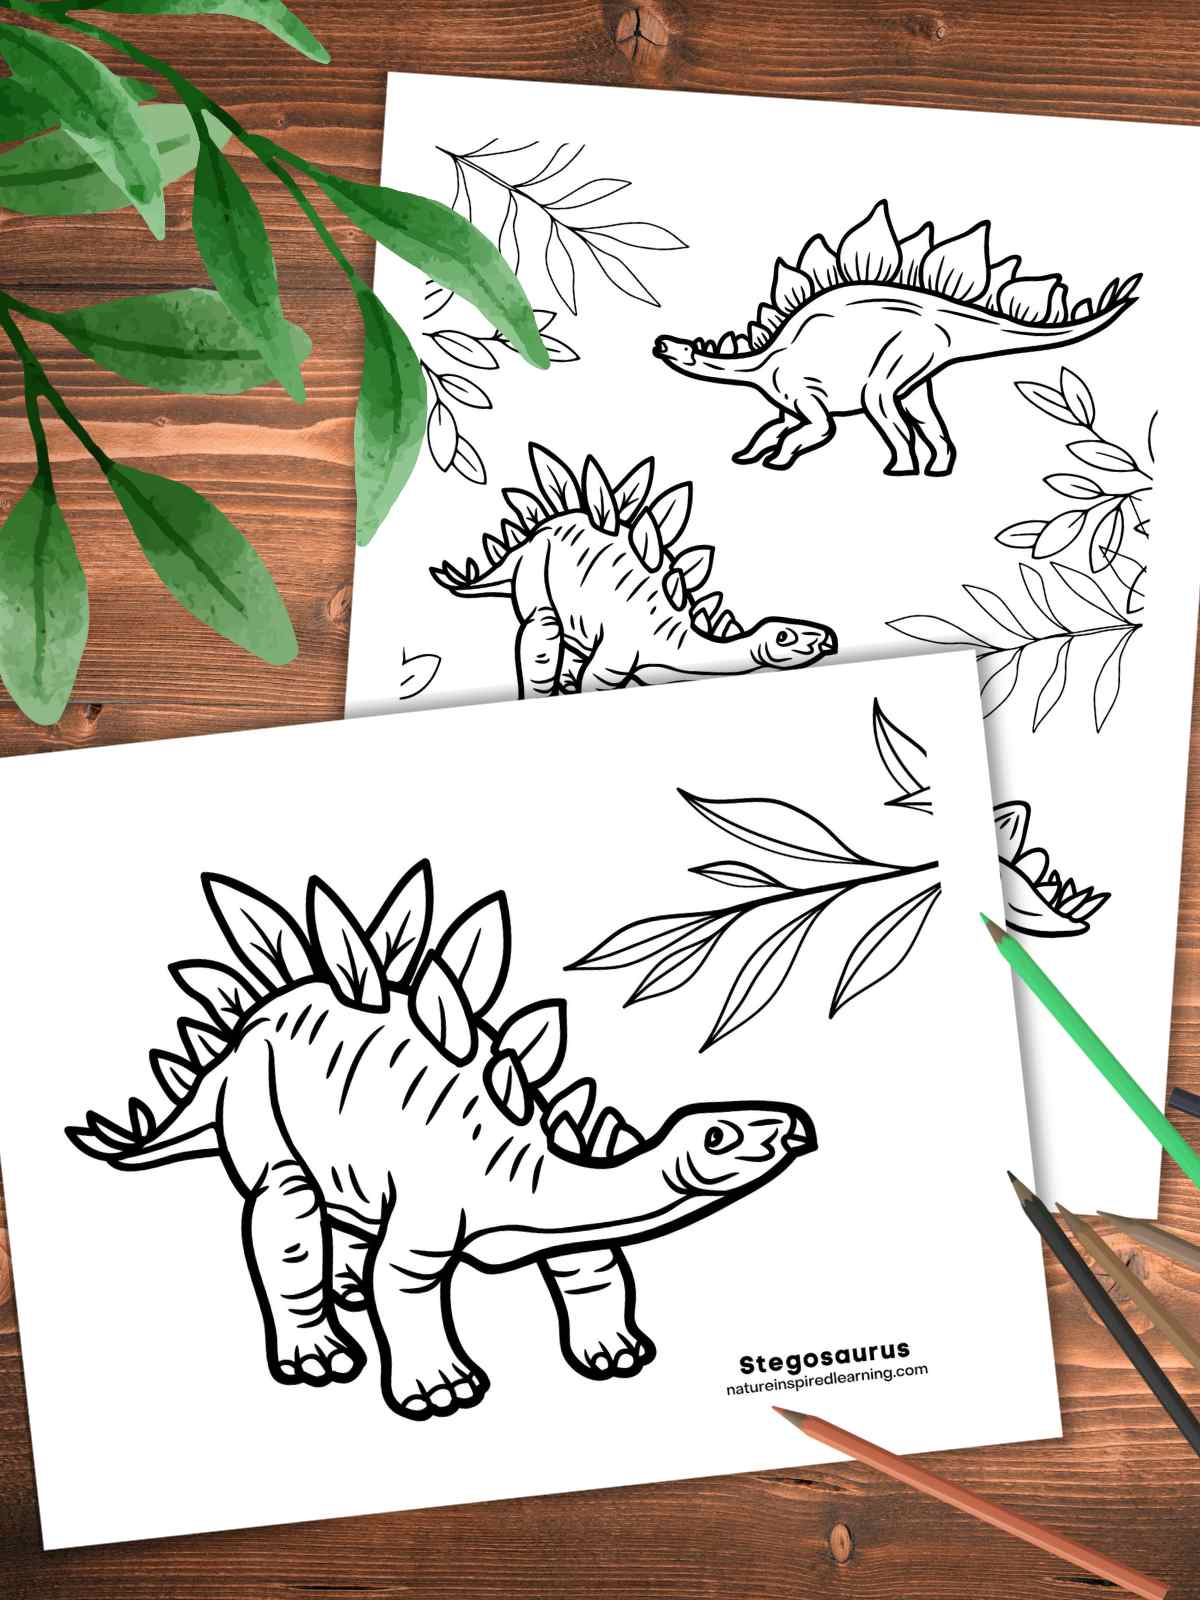 two printable coloring sheets with stegosaurus designs on a wooden background with green leaves upper left and colored pencils bottom left.